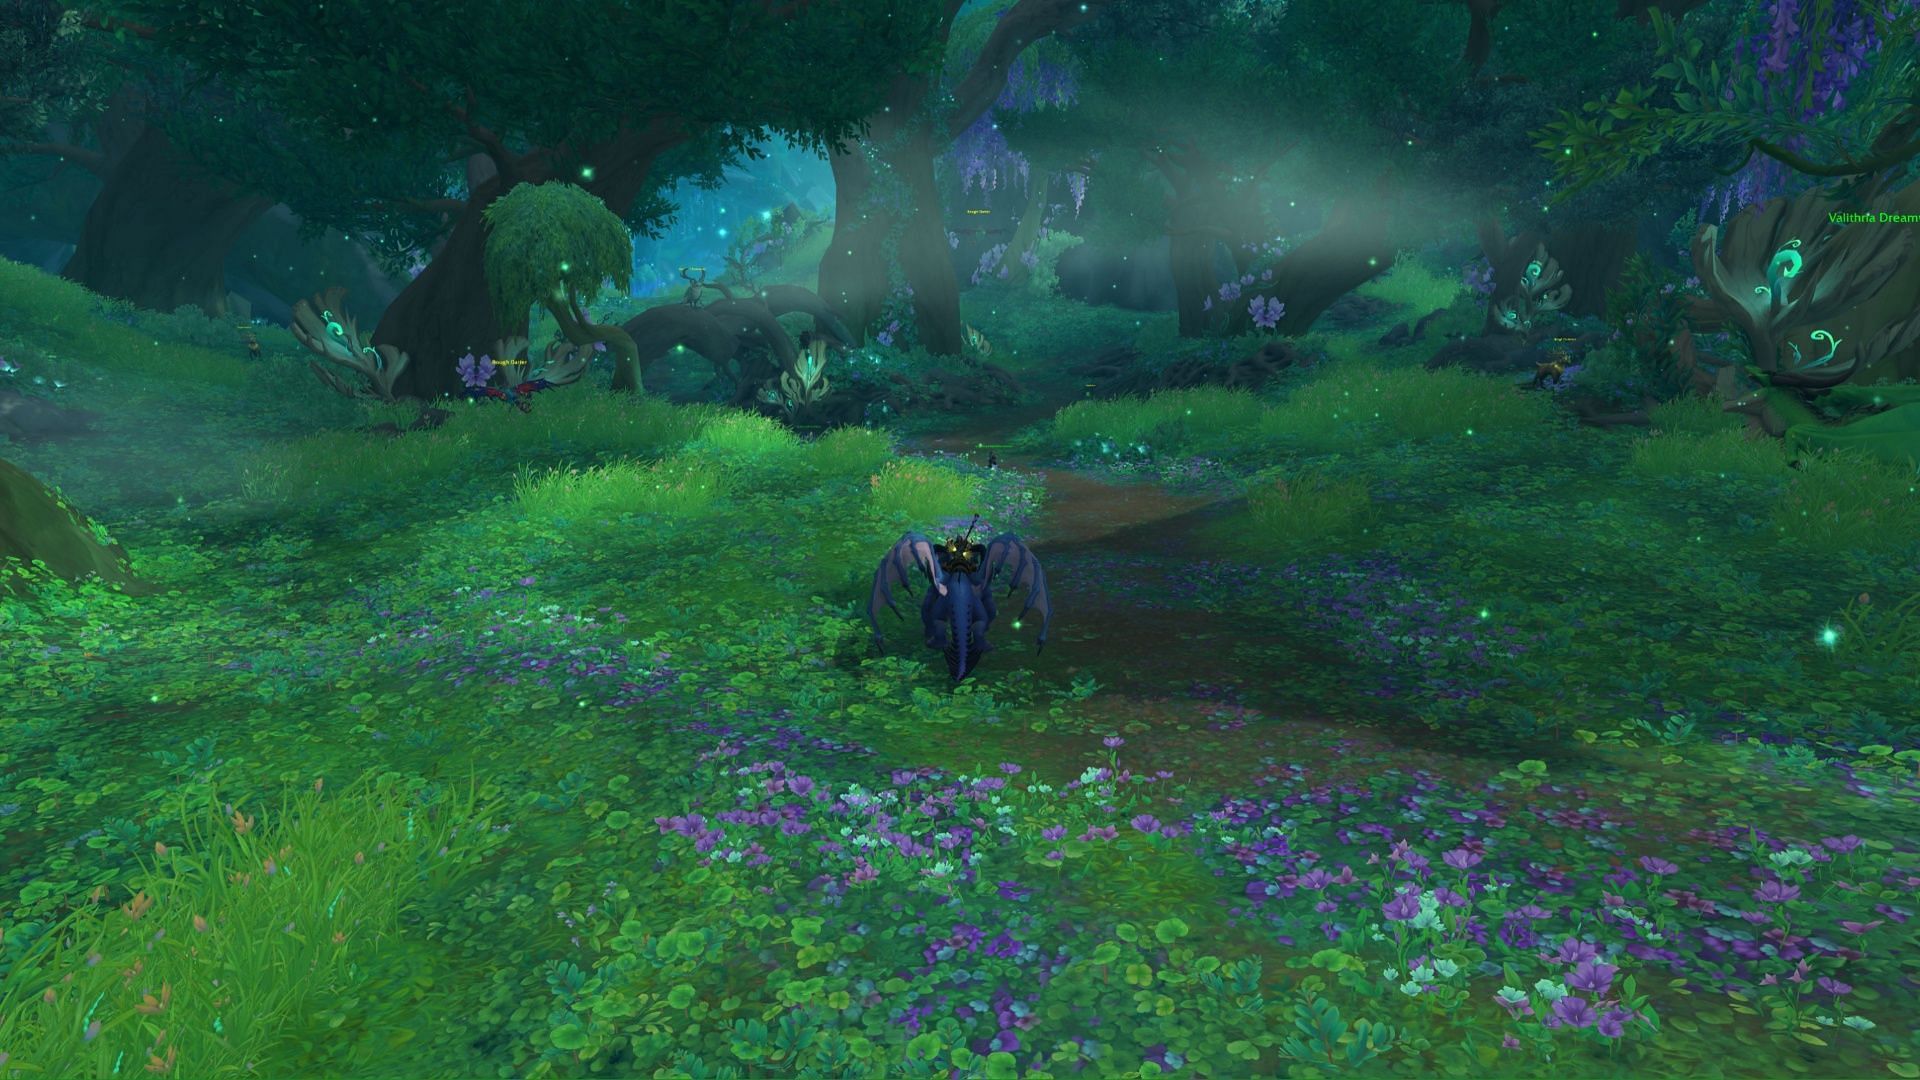 There are 19 treasures to find in the Emerald Dream zone of World of Warcraft Dragonflight.